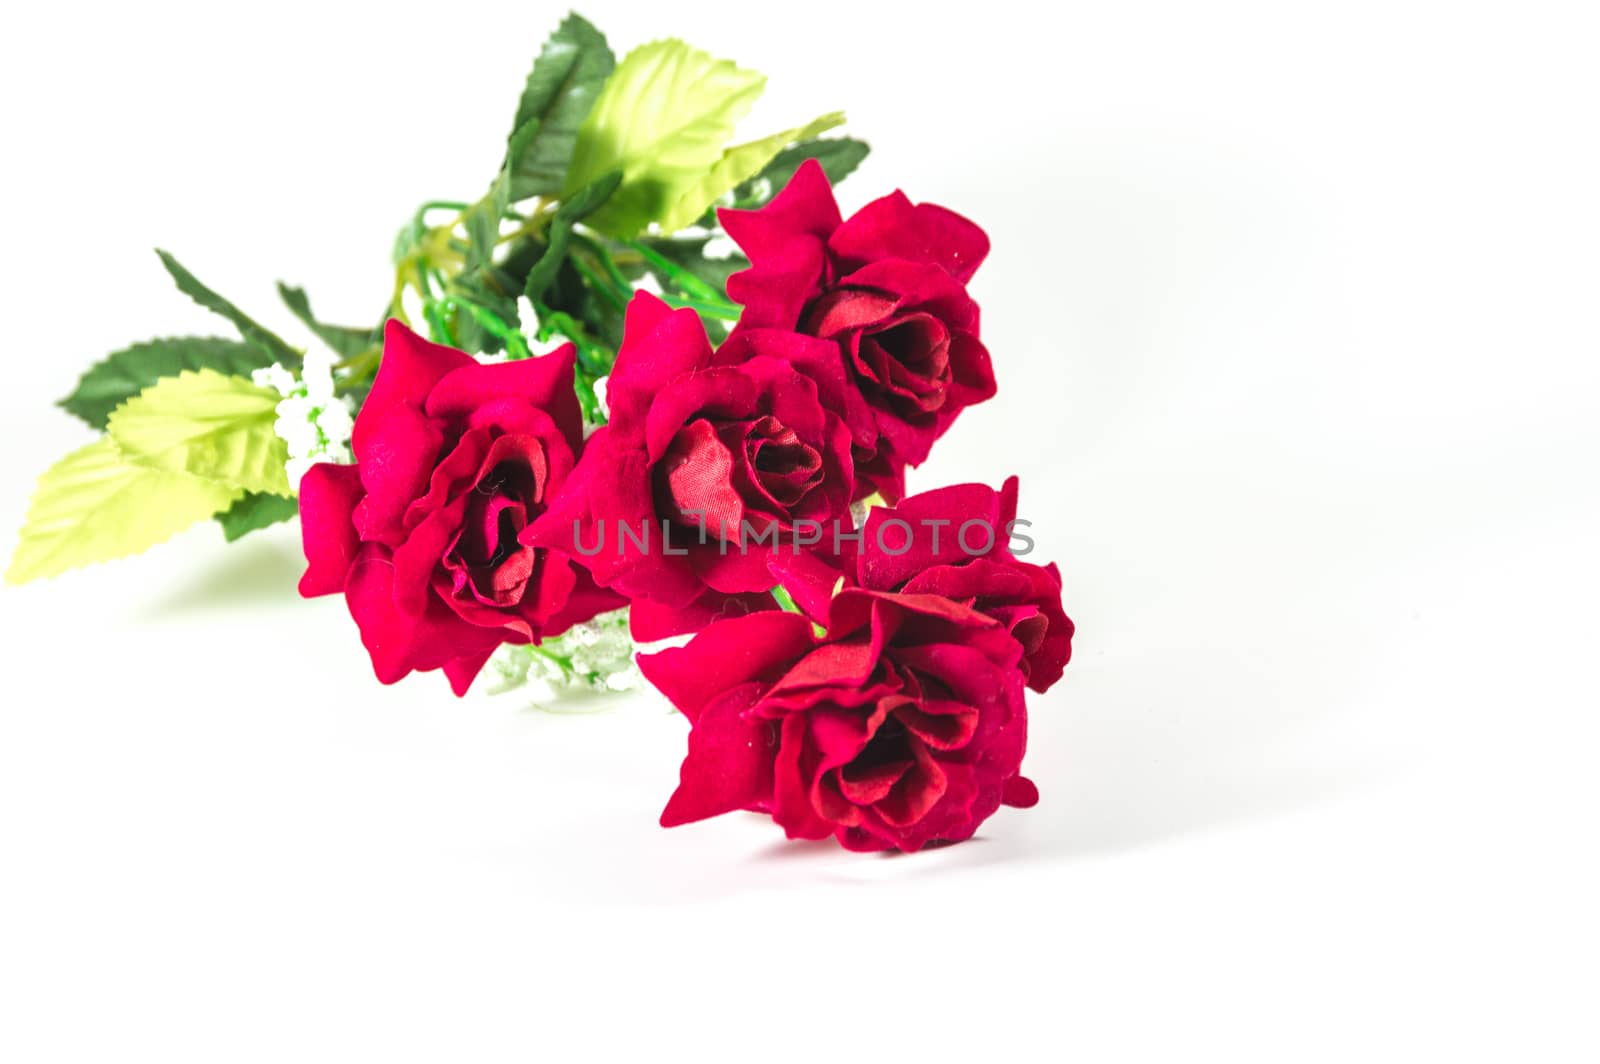 Beautiful red rose isolated on white background by toodlingstudio